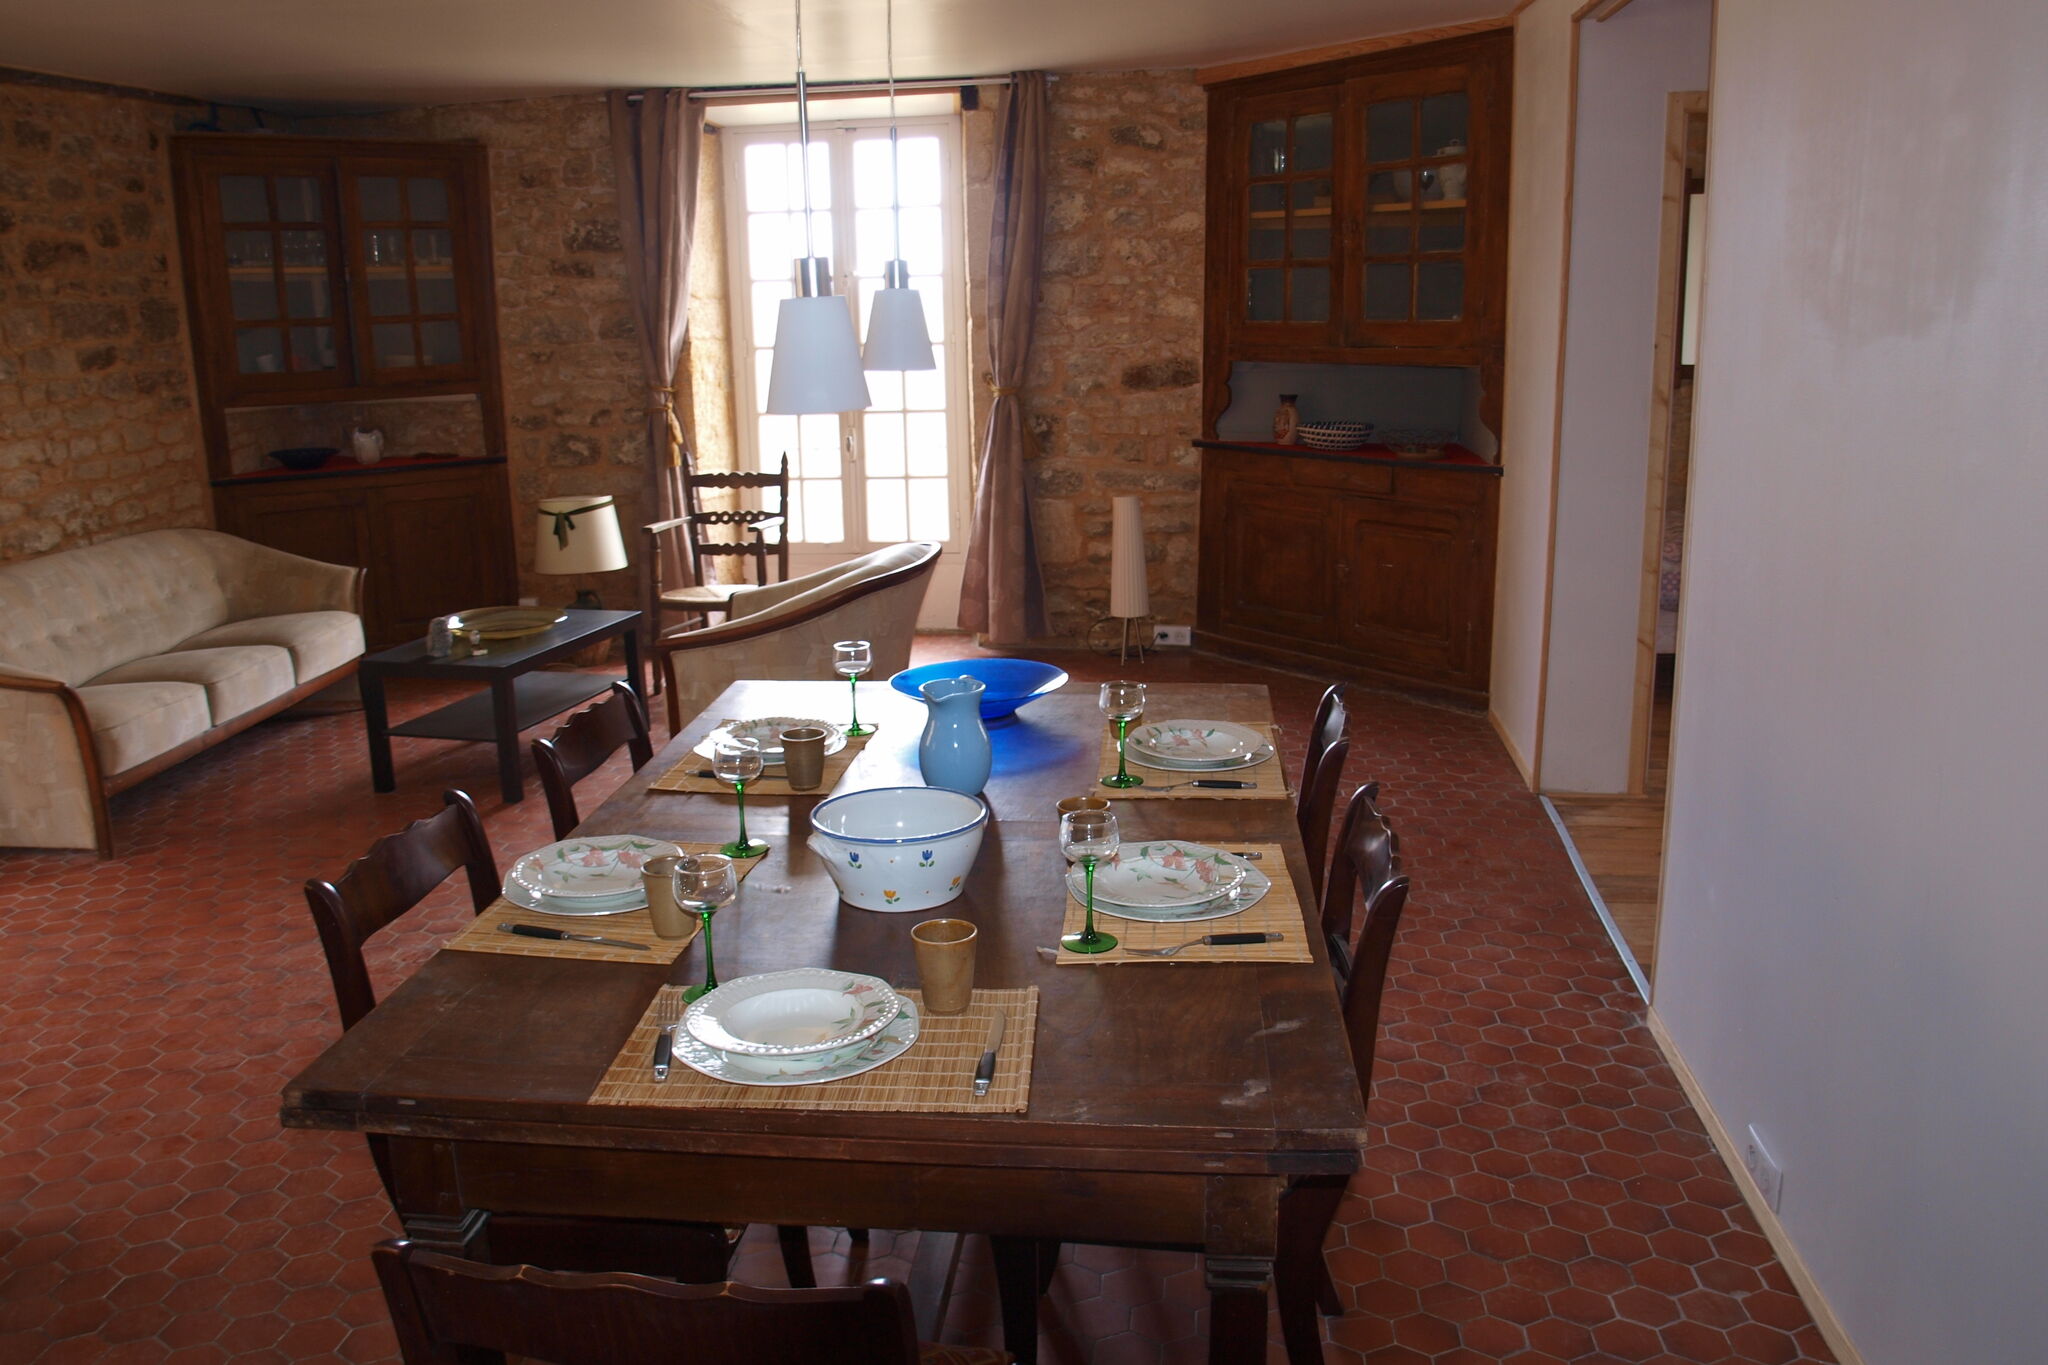 Three lovely gîtes surrounded by nature, with private swimming pool and garden